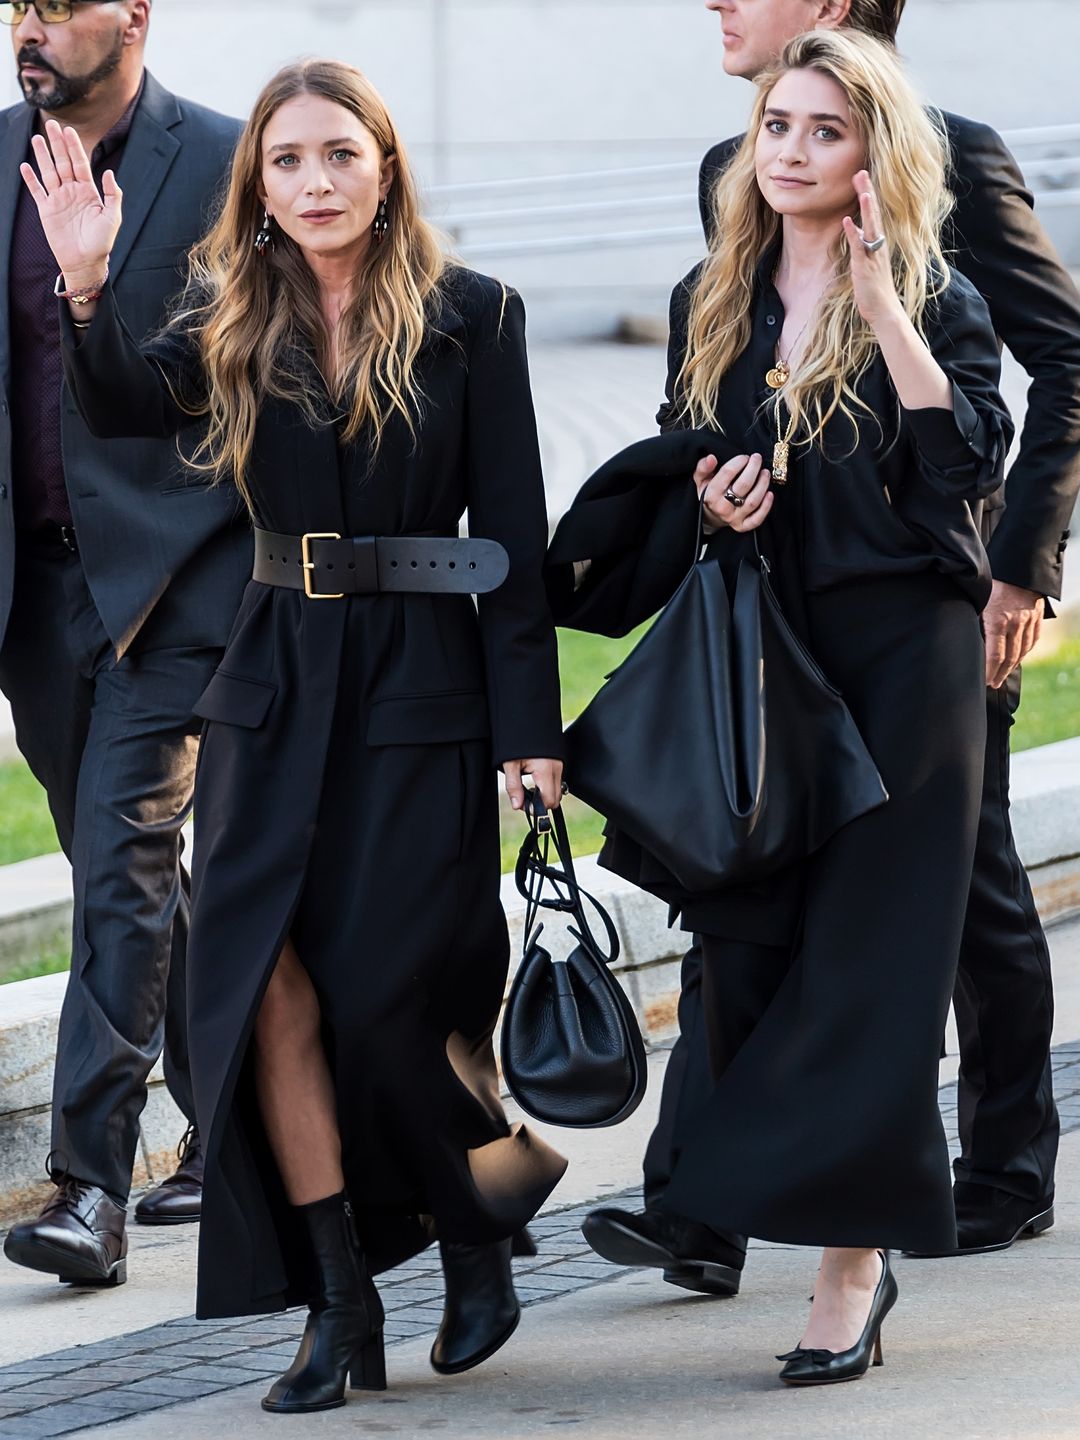  Fashion designers Mary-Kate Olsen and Ashley Olsen are seen arriving to the 2018 CFDA Fashion Awards at Brooklyn Museum on June 4, 2018 wearing all black ensembles